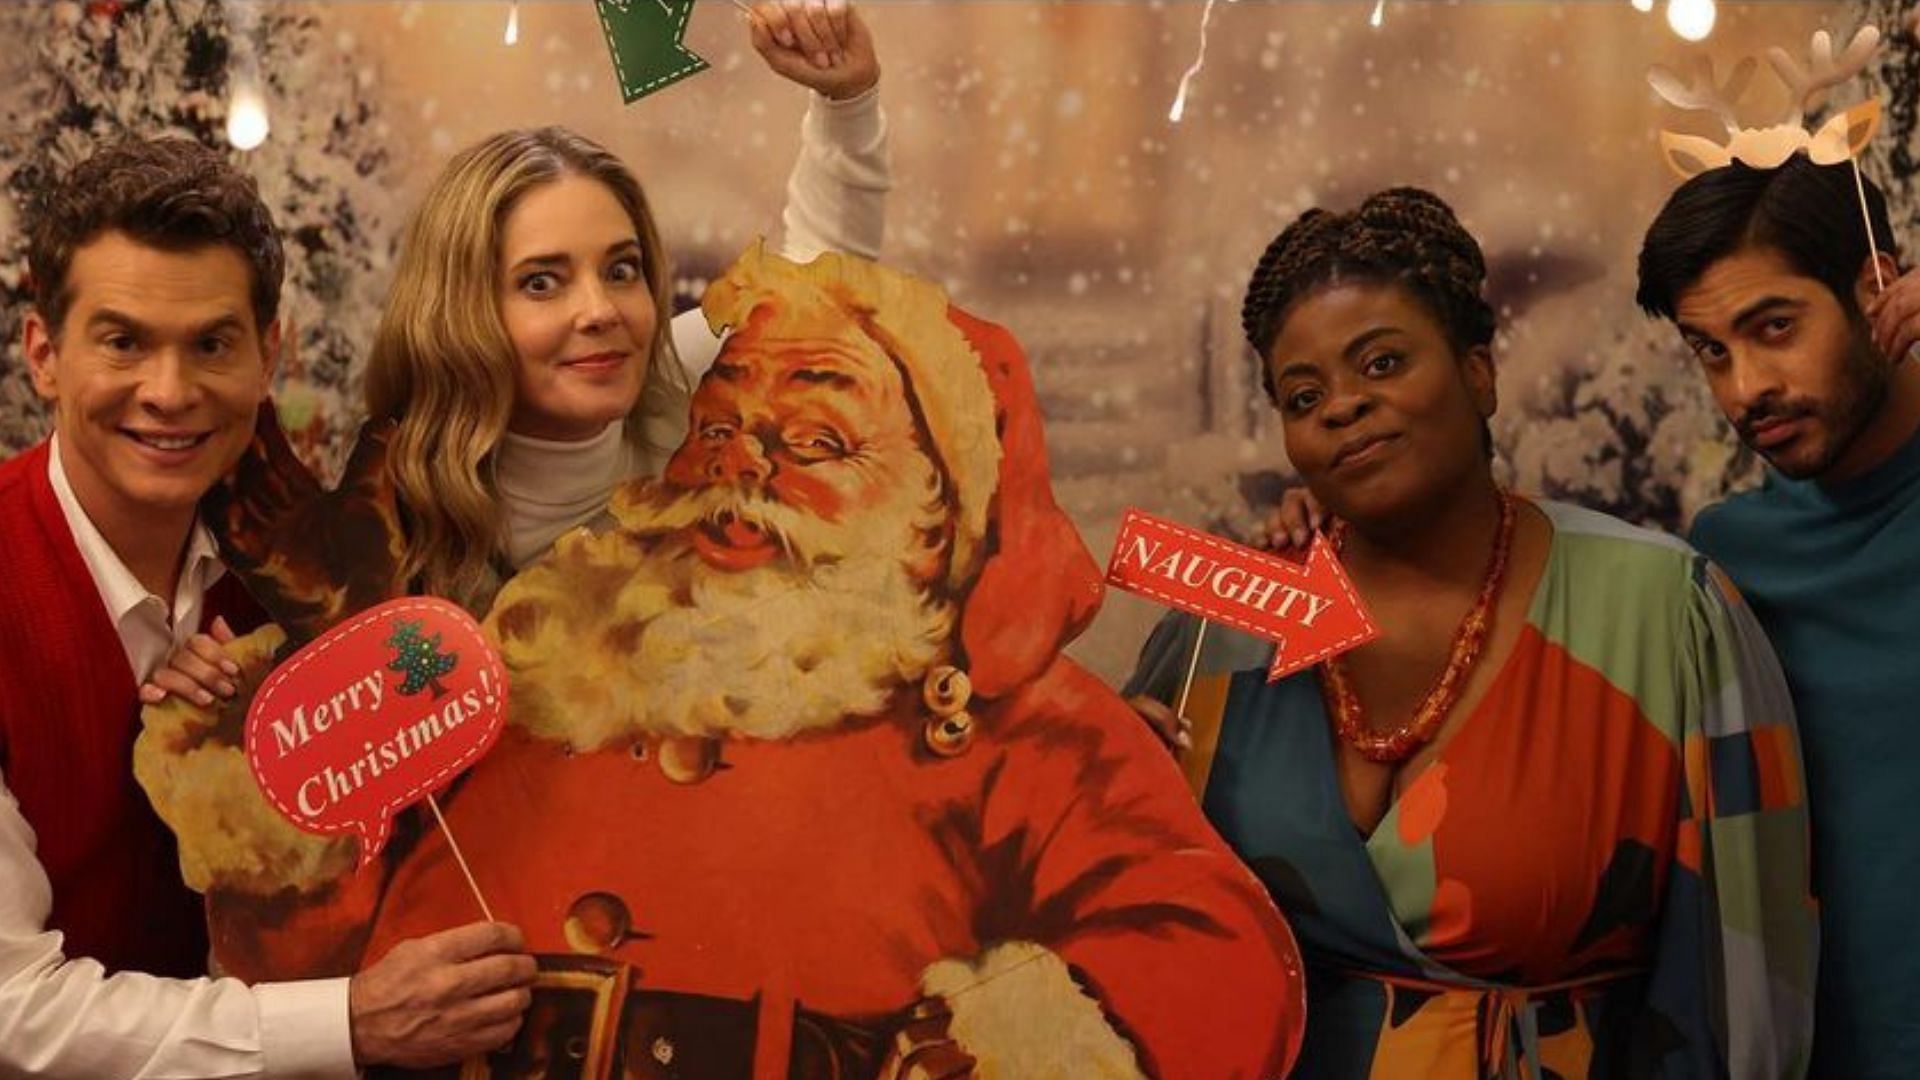 A promotional poster for I Believe in Santa (Image Via ladychristinamoore/Instagram)